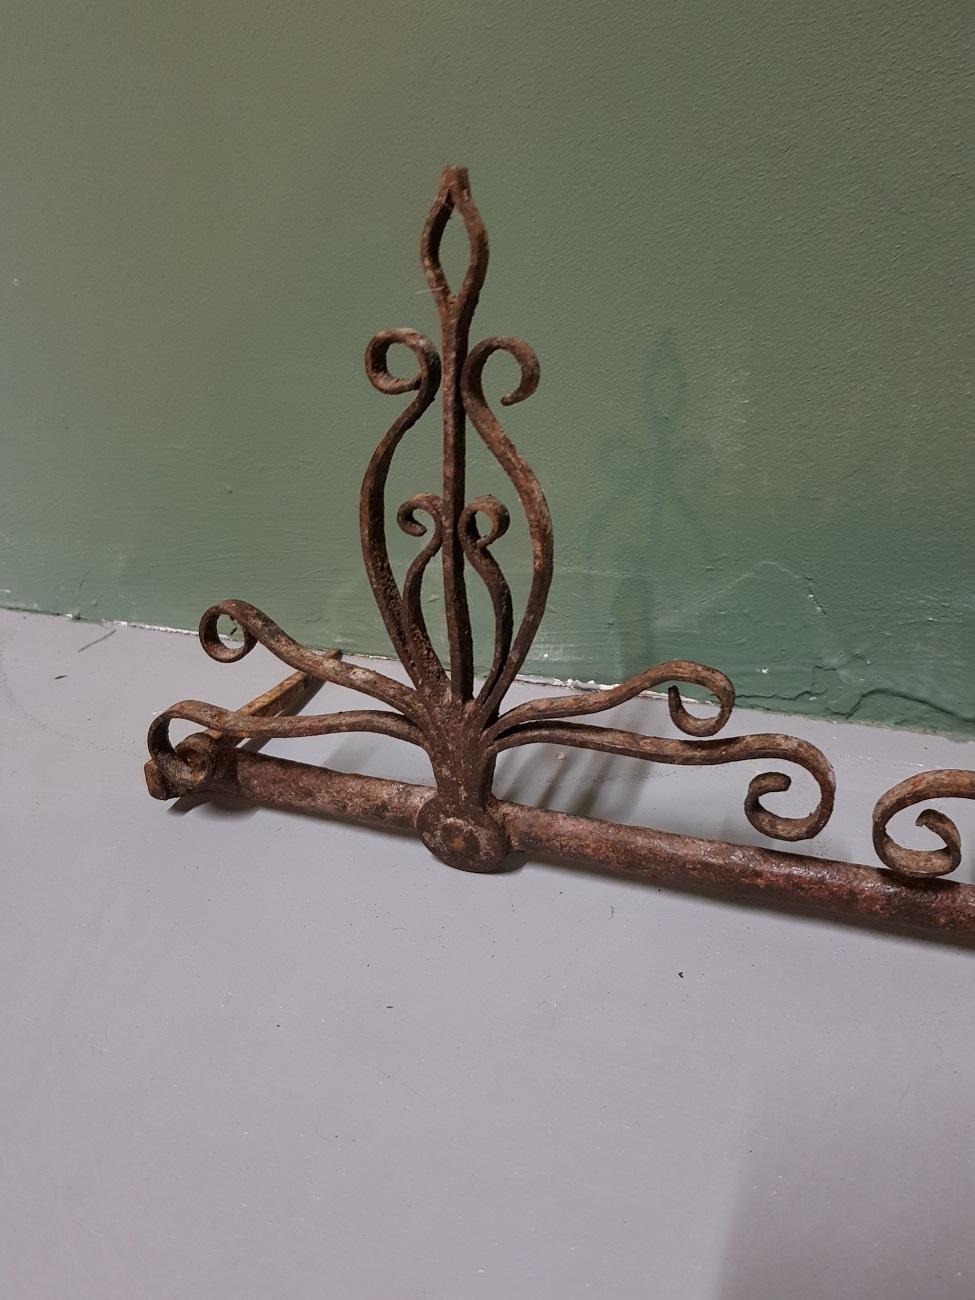 17th-18th century Dutch wrought iron wall rack for fireplace tools, in a good condition and with a beautiful patina.

The measurements are:
Depth 10.5 cm/ 4.1 inch.
Width 35.5 cm/ 13.9 inch.
Height 17 cm/ 6.6 inch.